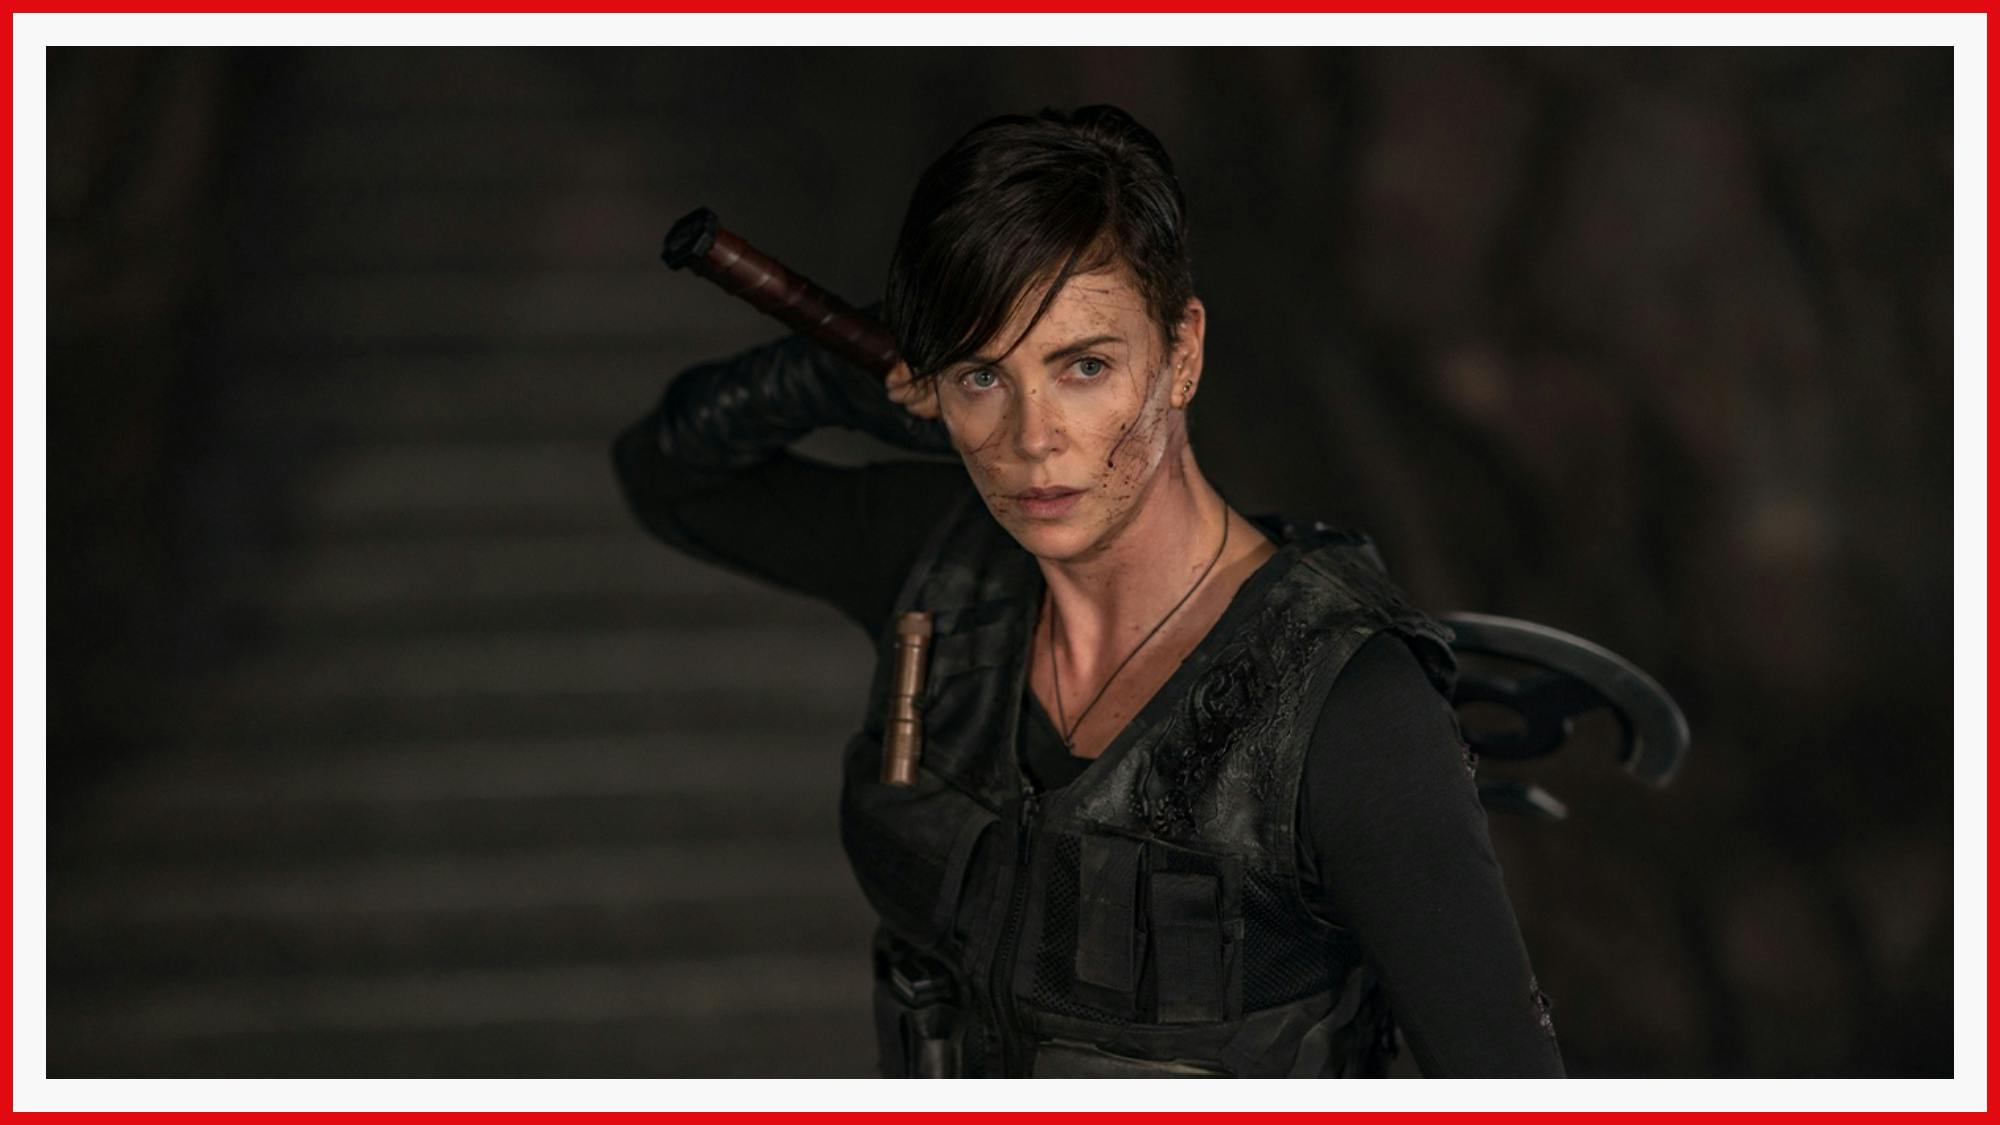 Charlize Theron looks ready for battle as Andy, leader of a group of immortal warriors